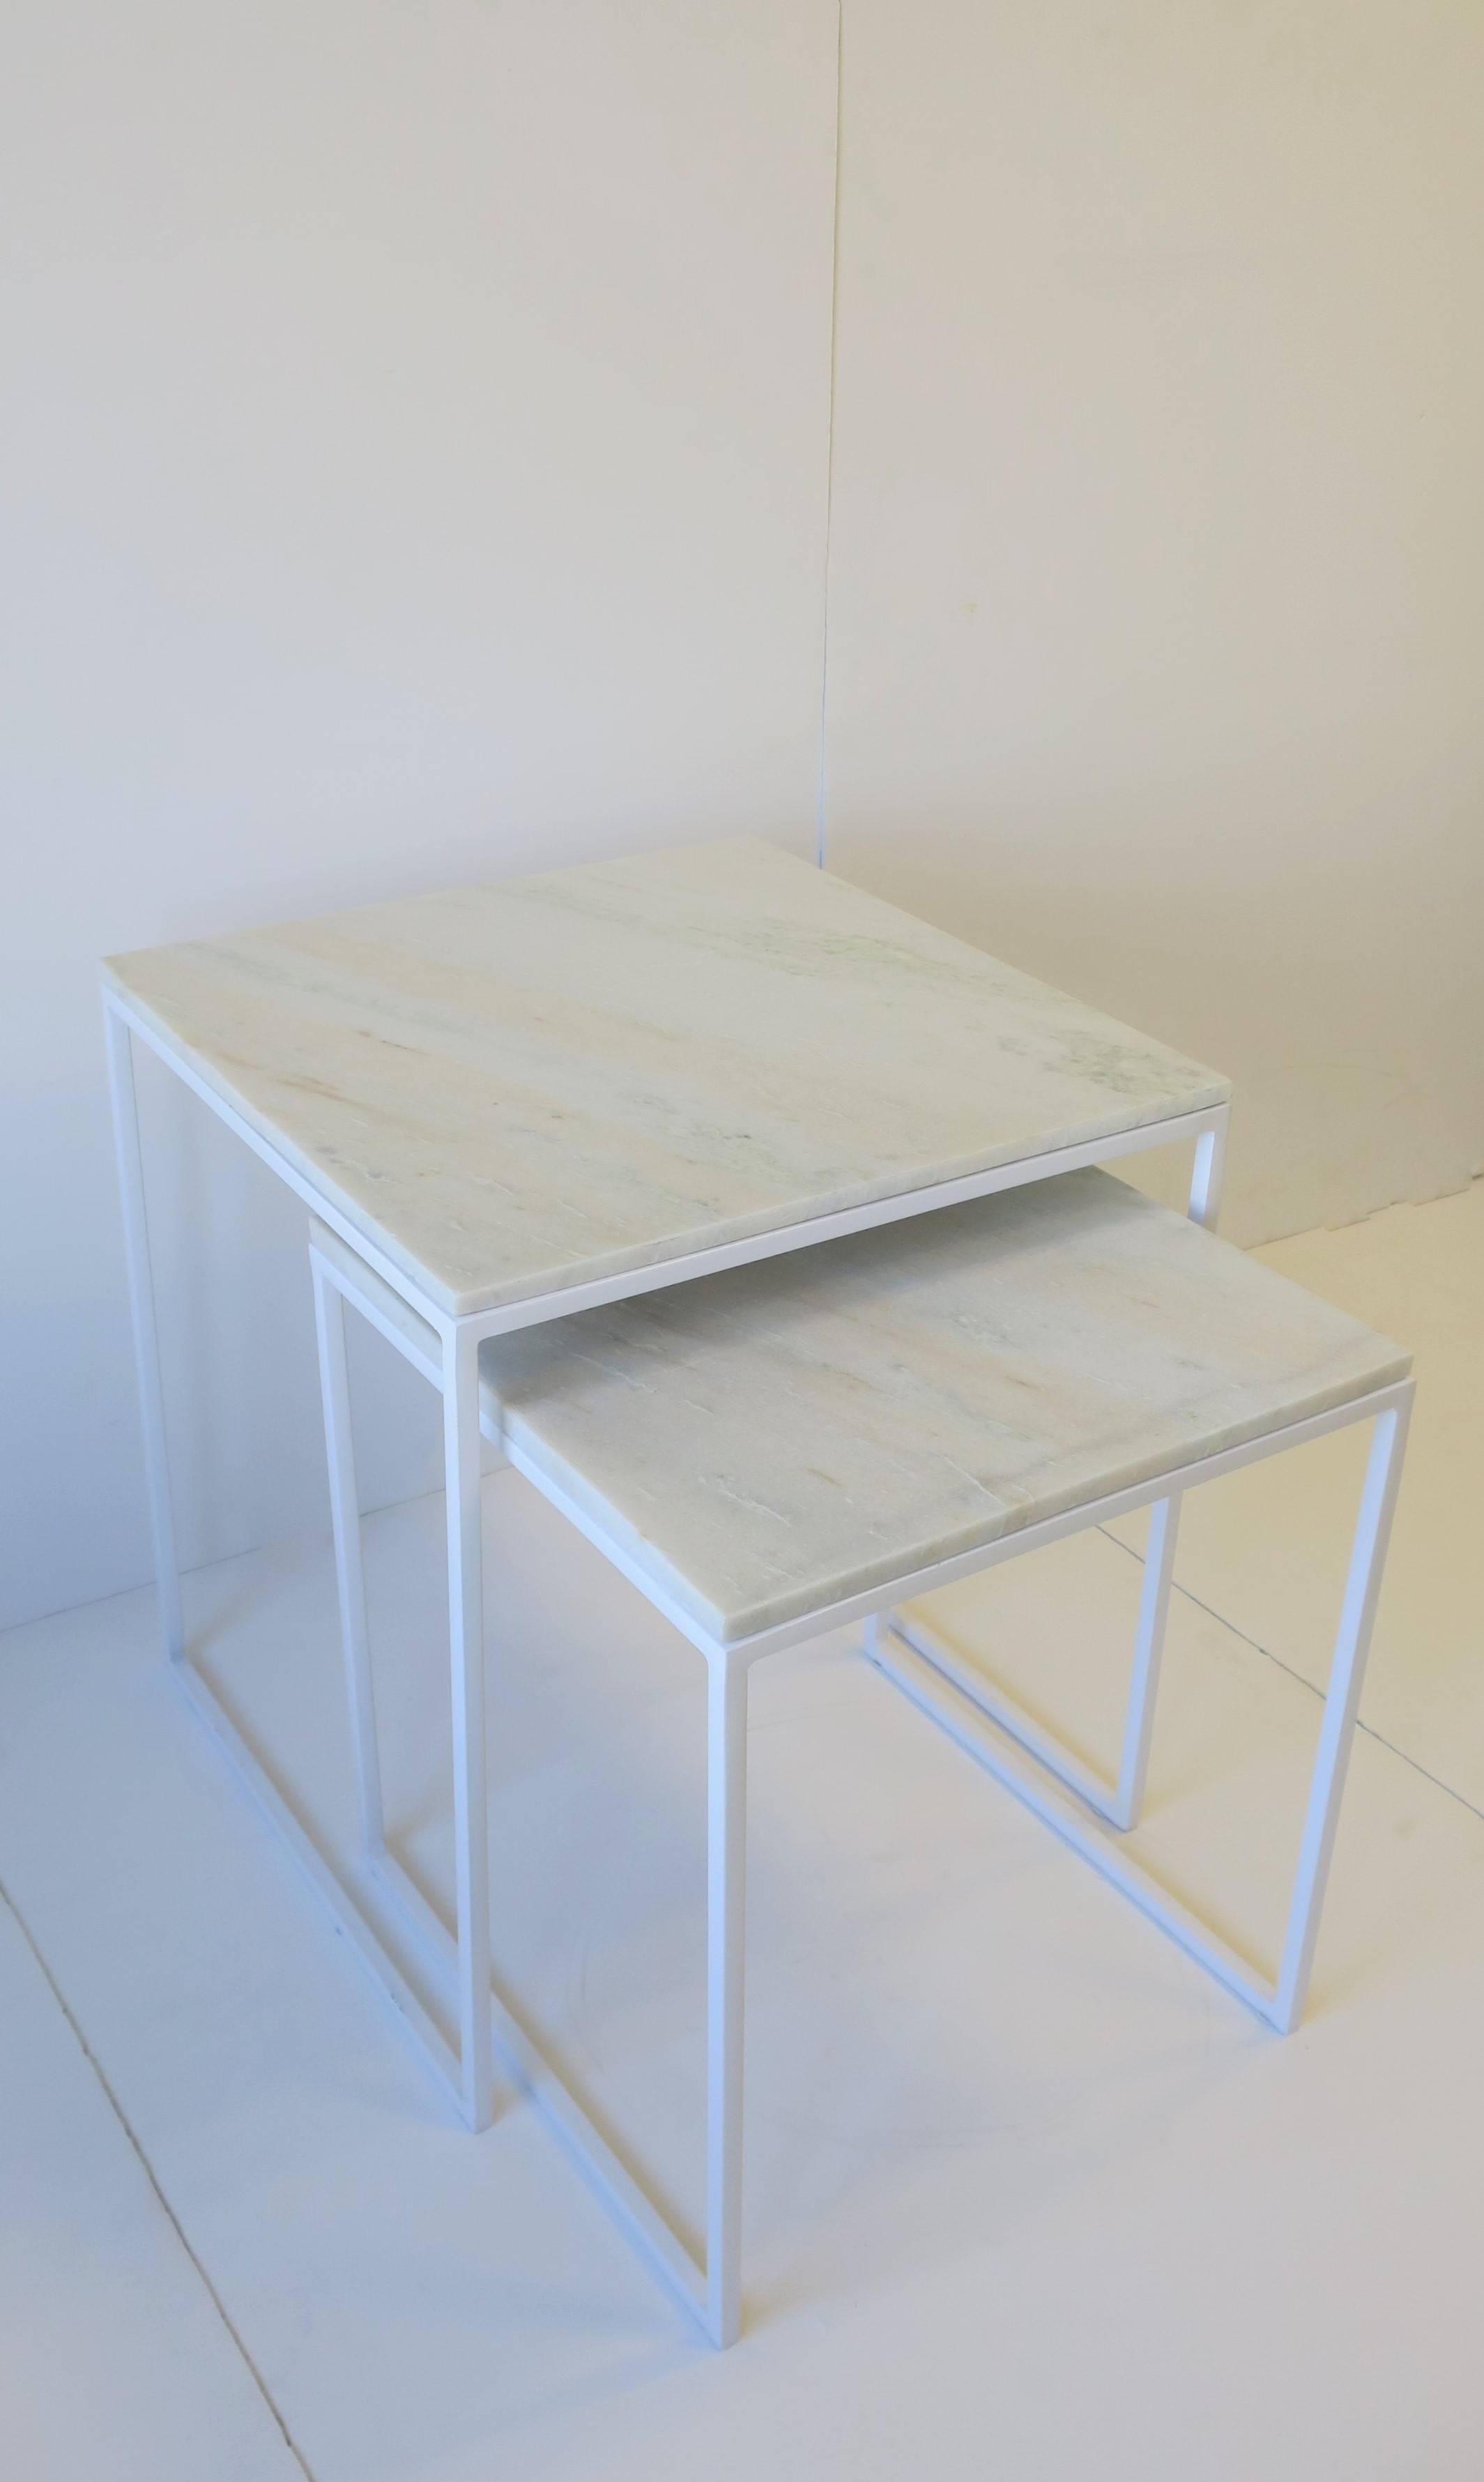 A set/pair of Modern or Minimalist style white granite marble nesting or end tables. Granite marble is white with light traces of grey and flesh tone hues as shown in images. Base is a white gloss over metal. A great set of tables; Top table works